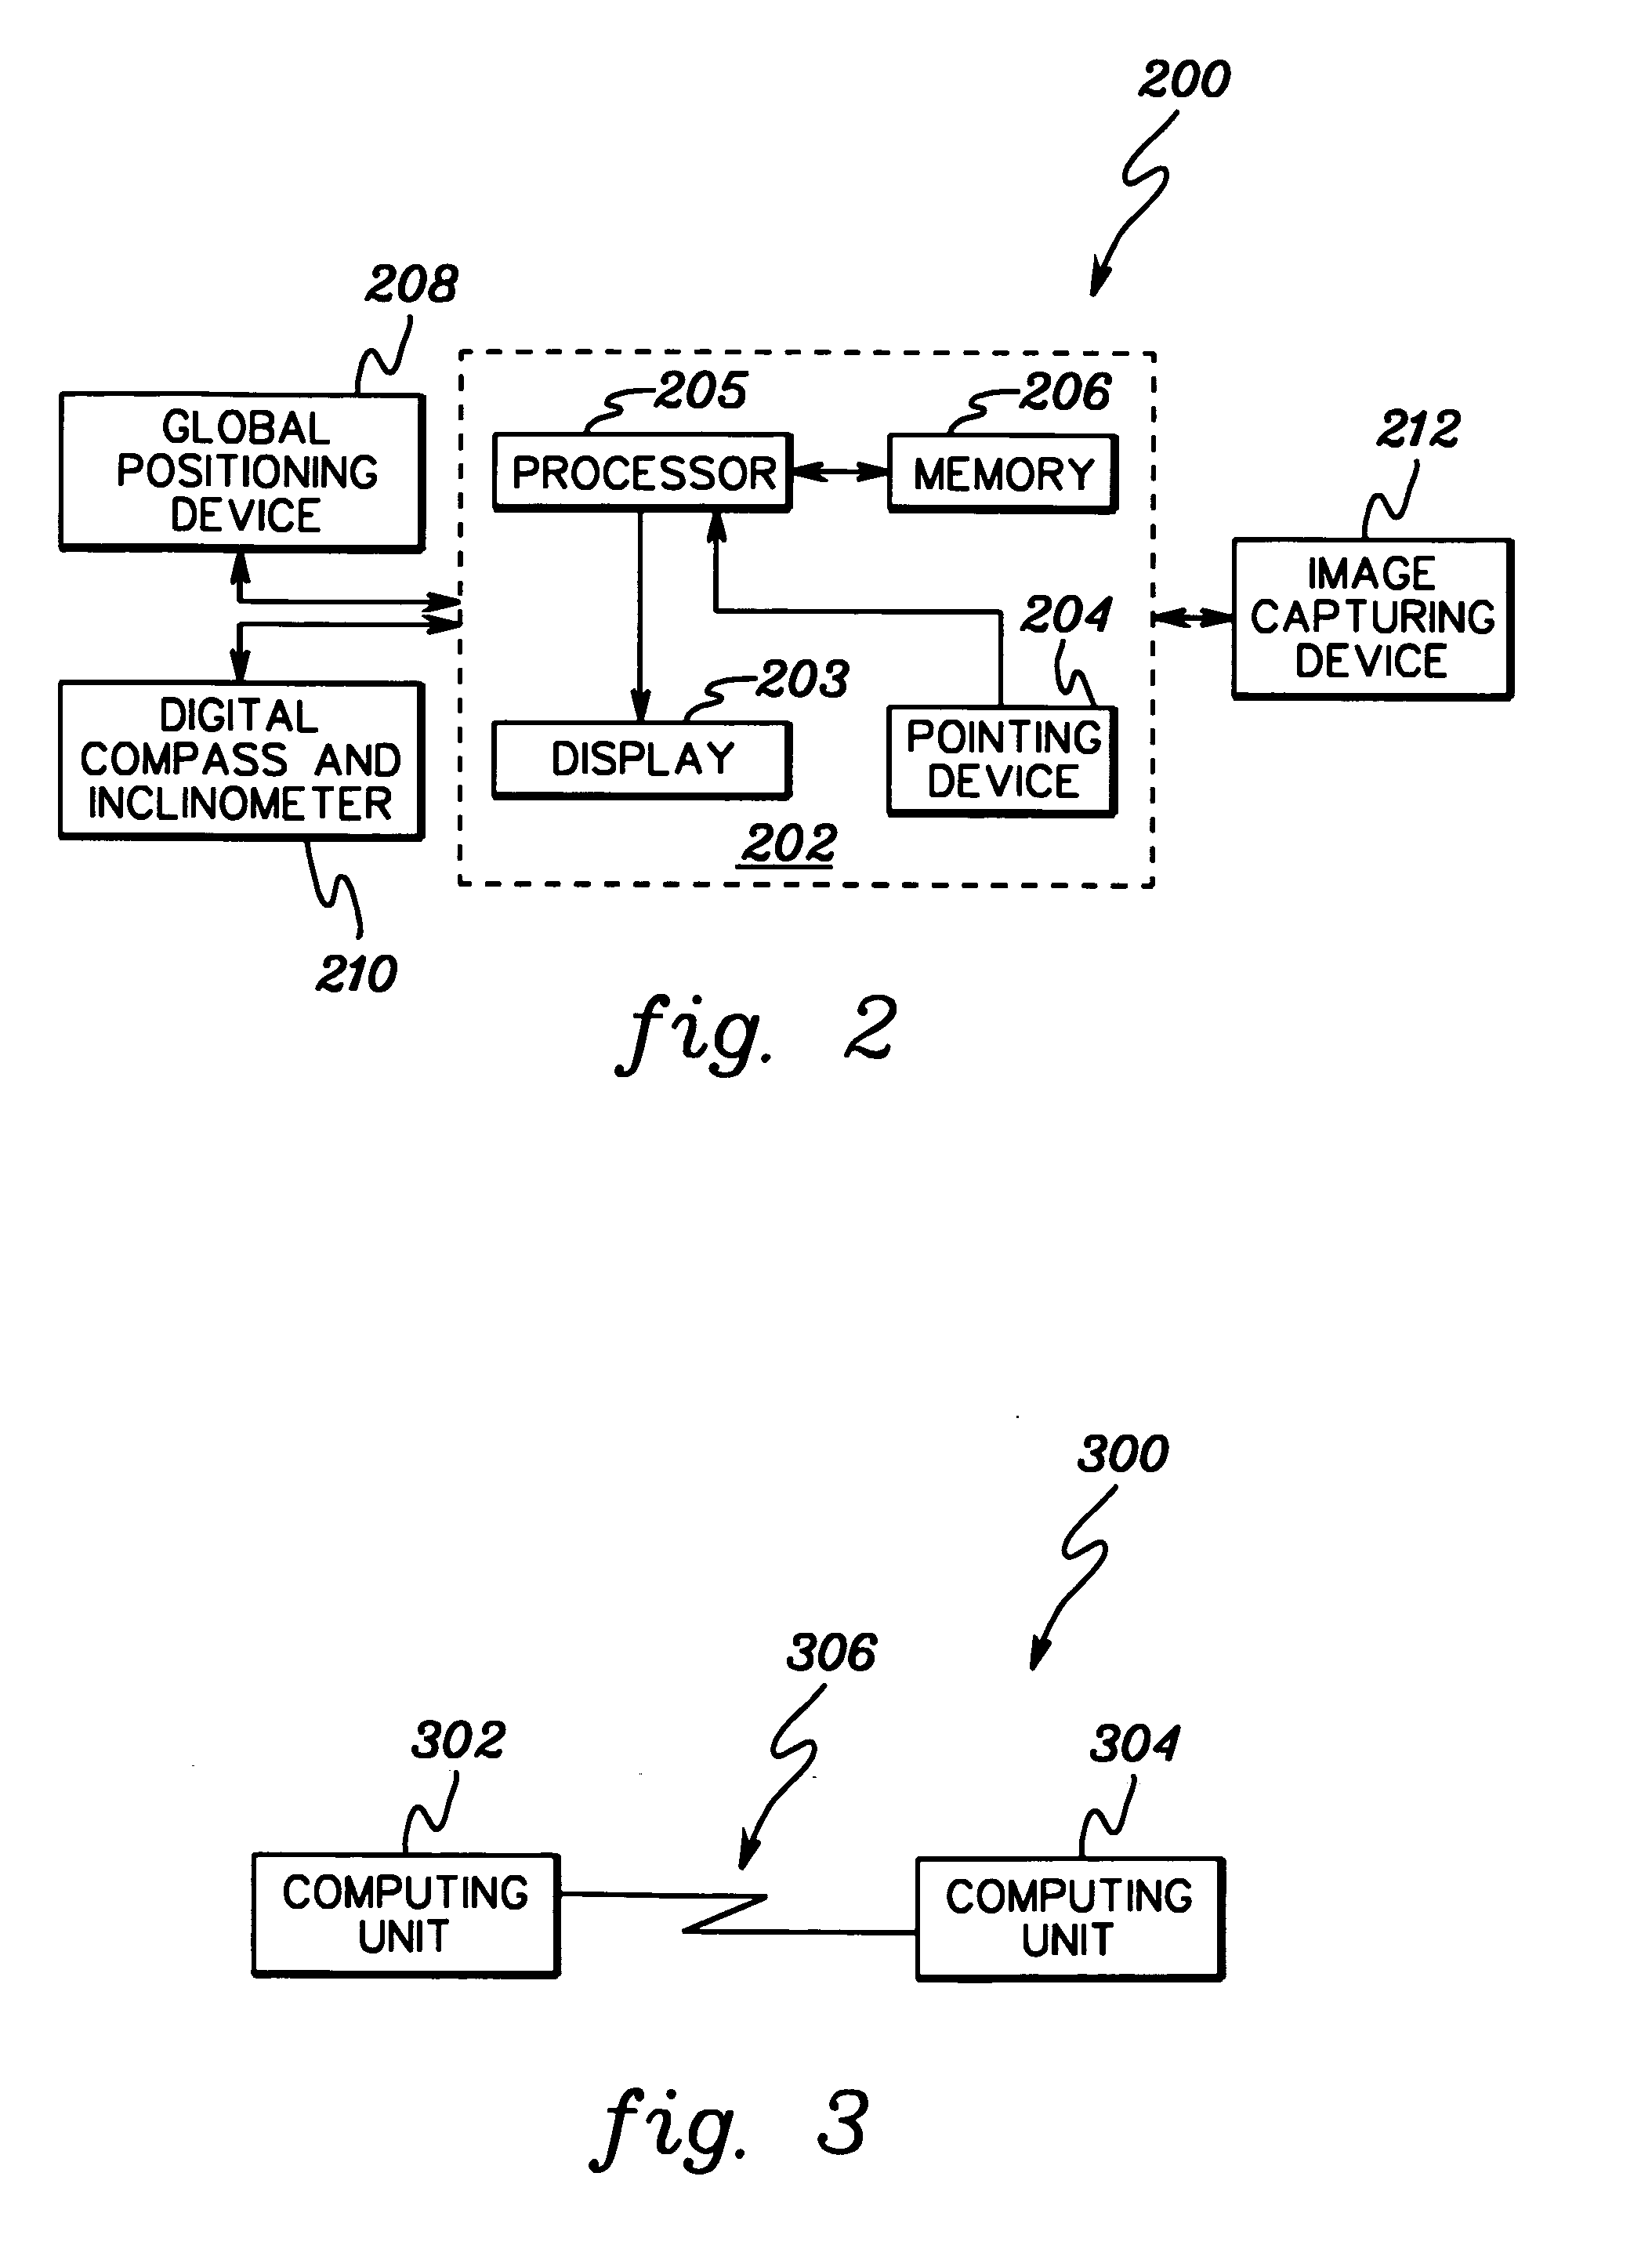 Method, system and program product for augmenting an image of a scene with information about the scene